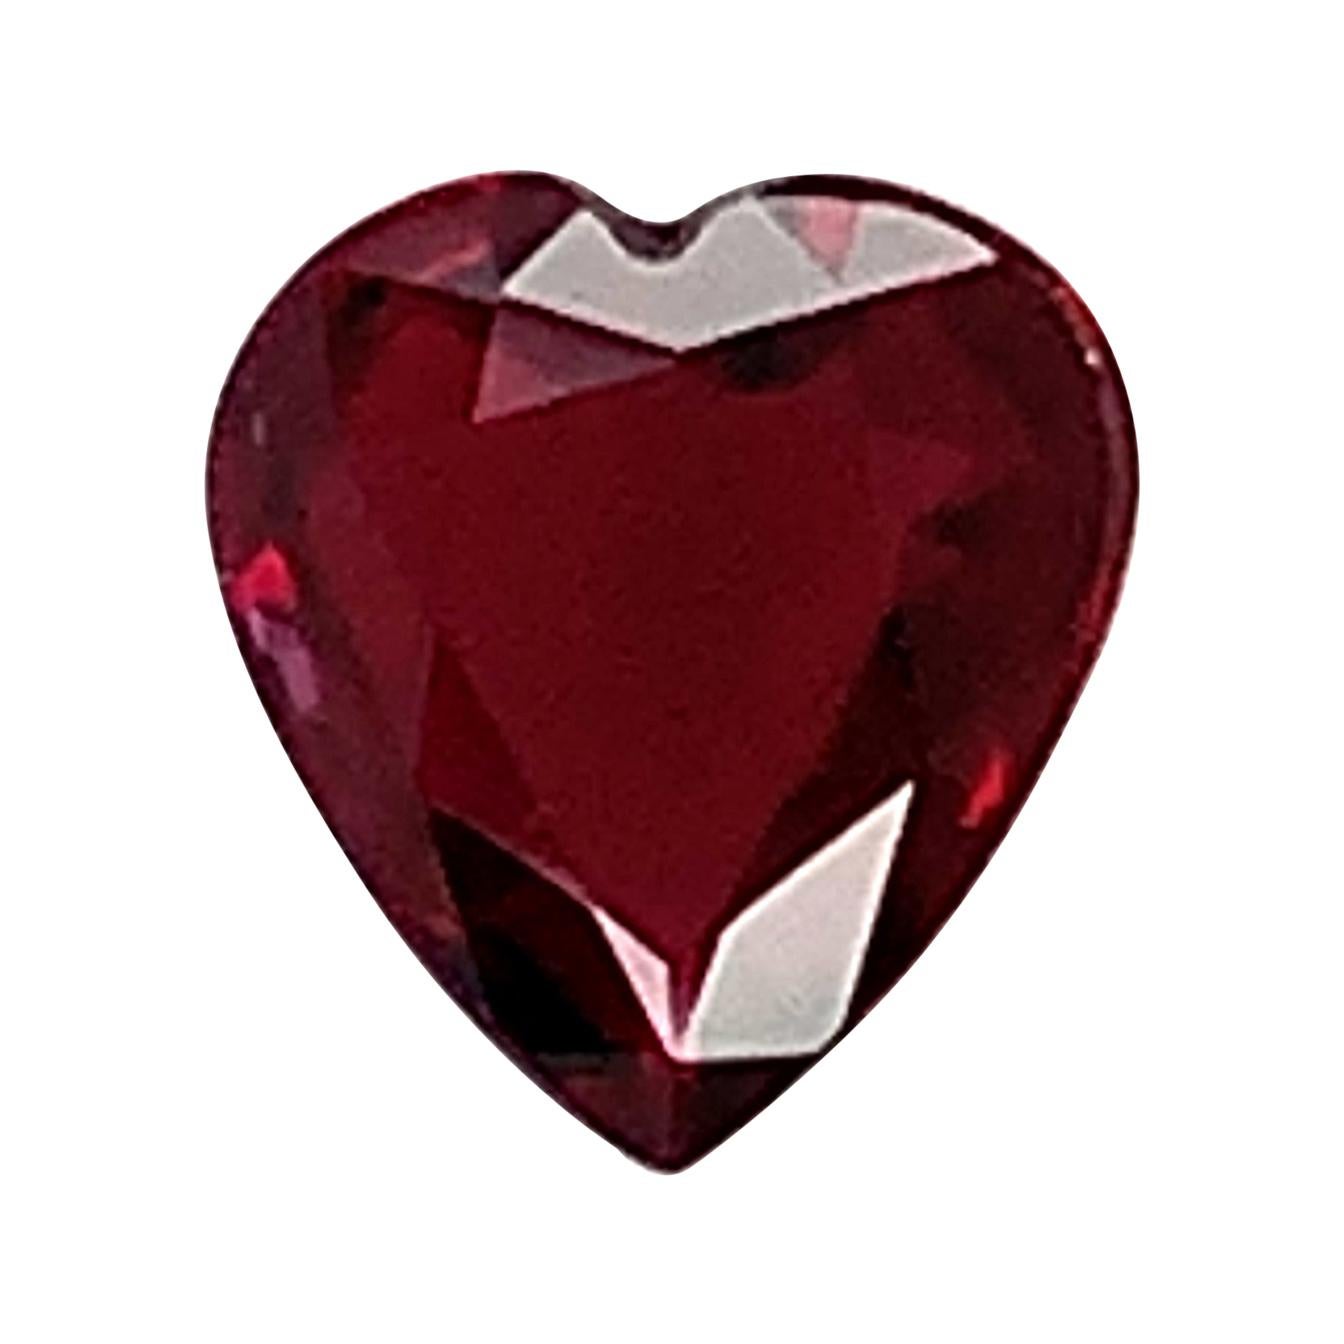 2.00 Carat Heart Shaped Ruby, Unset Loose Gemstone, GIA Certified For Sale